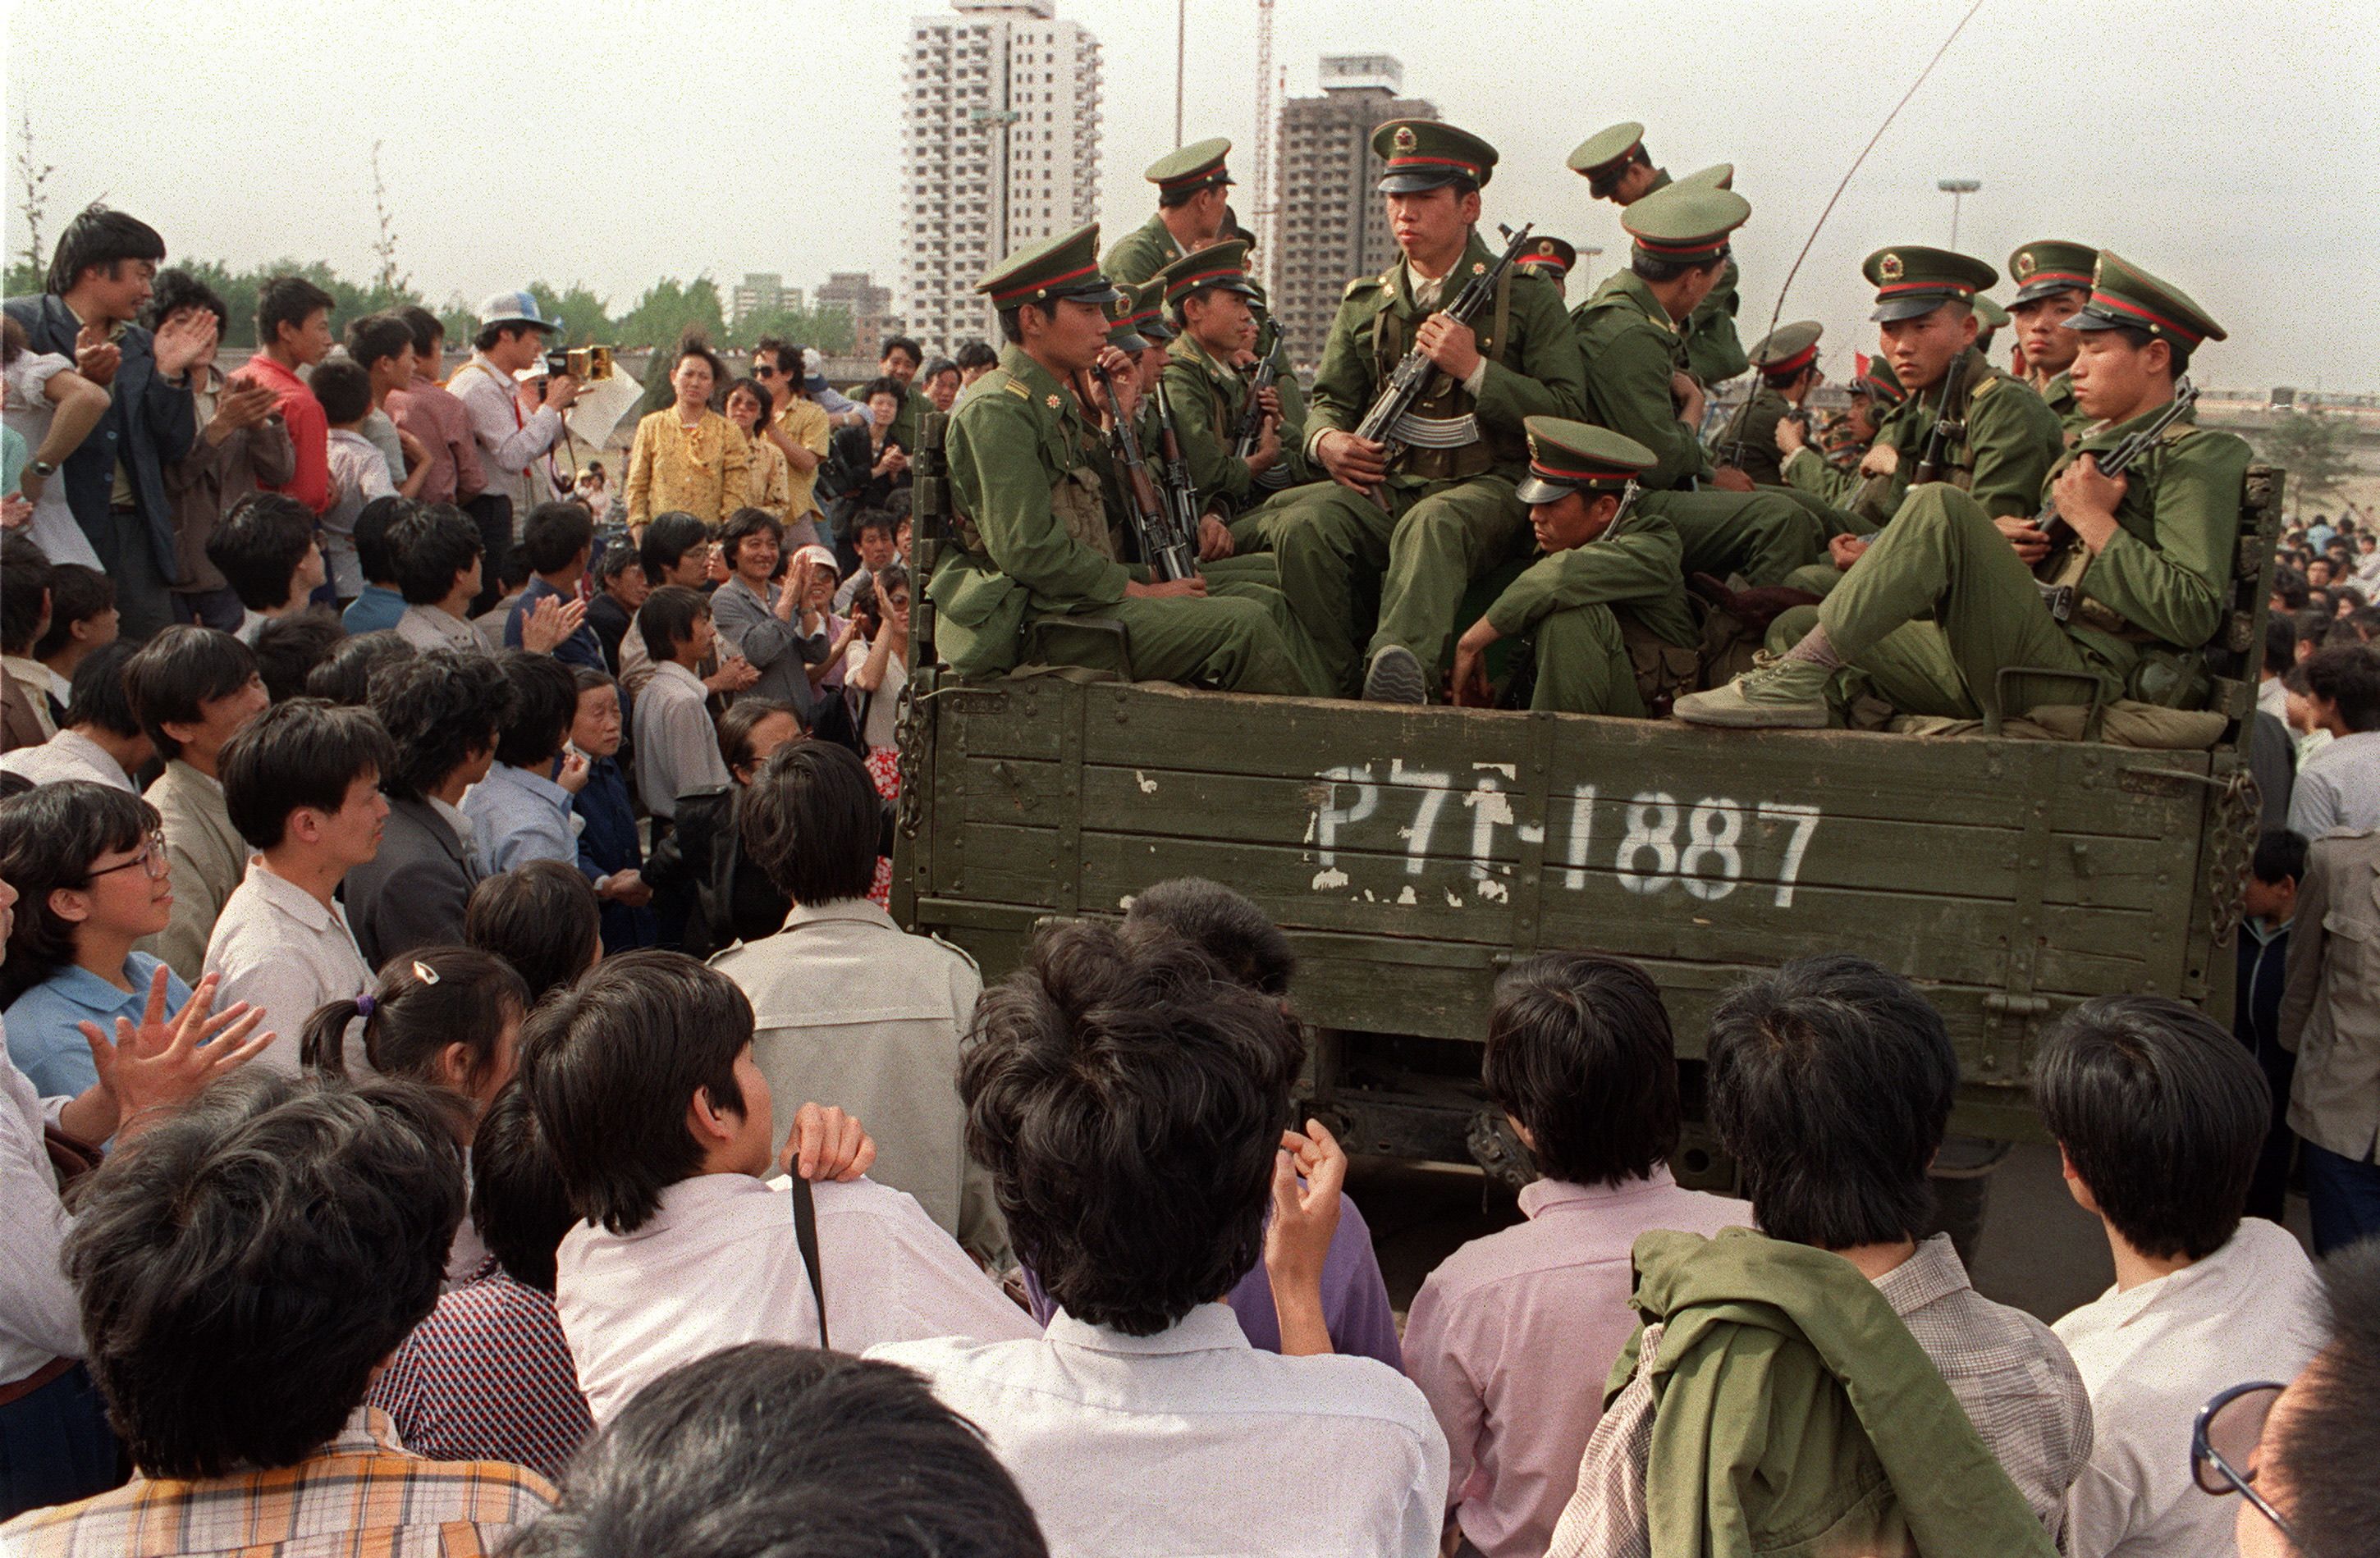 Tiananmen Square massacre: How Beijing turned on its own people | CNN